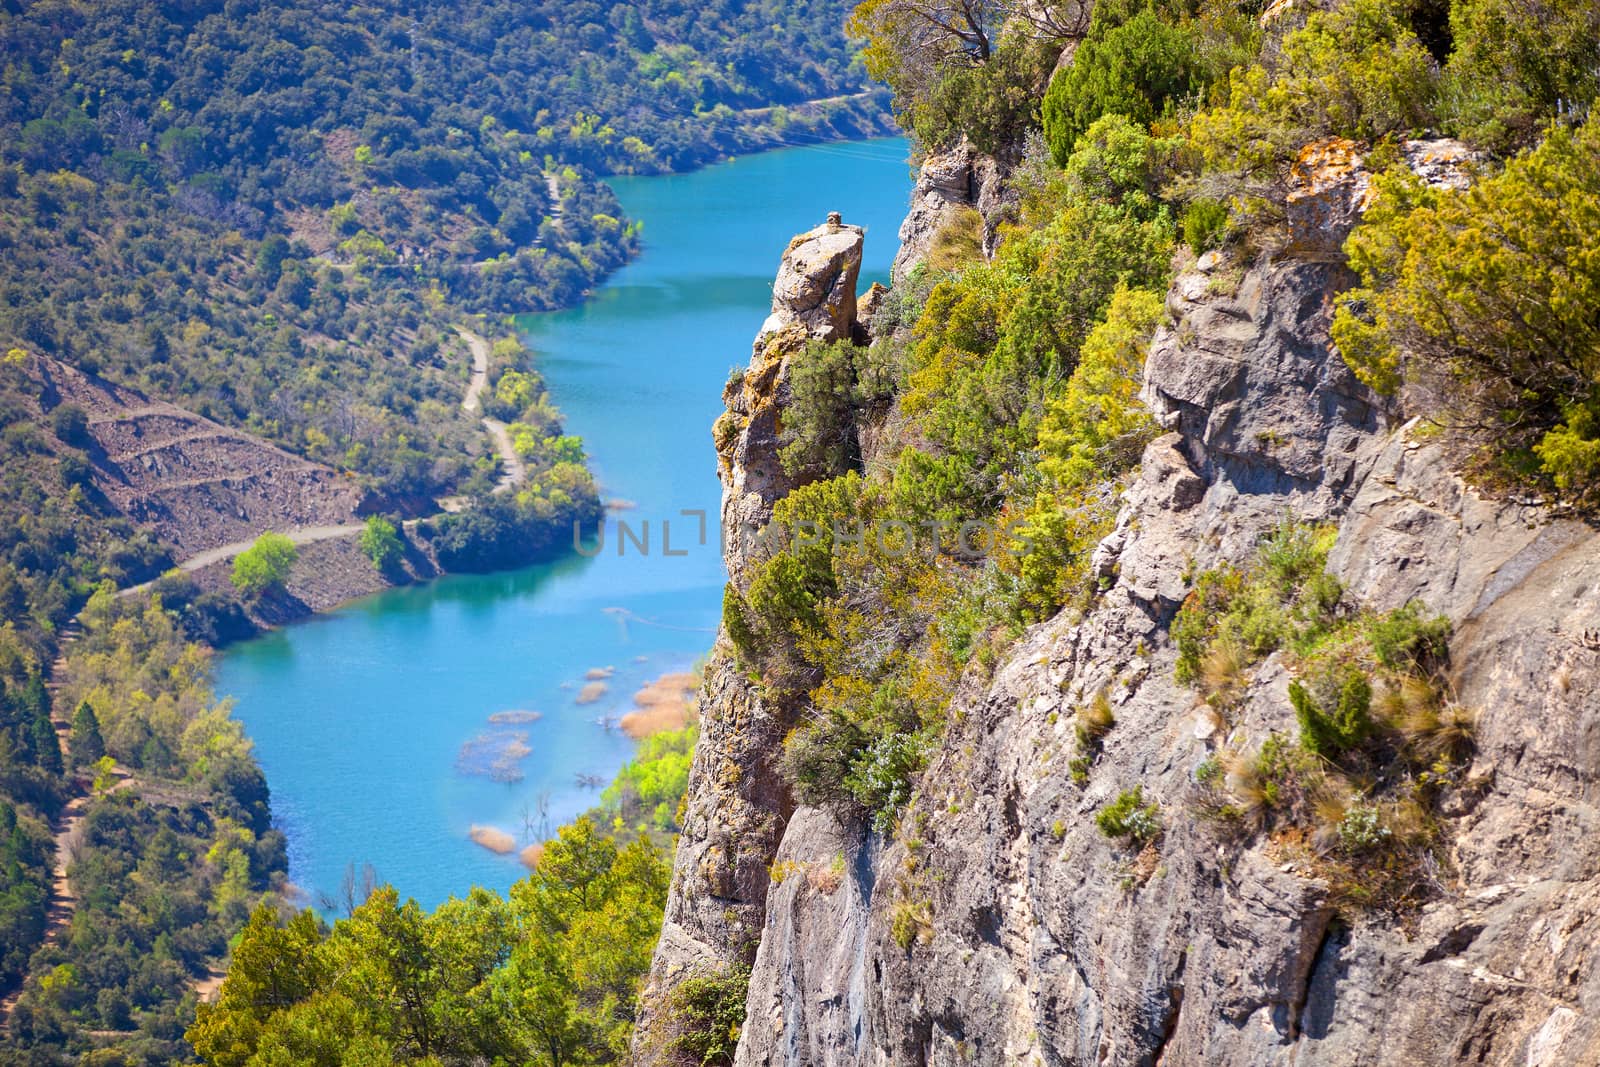 View of cliff and river flowing below near Siurana by photobac